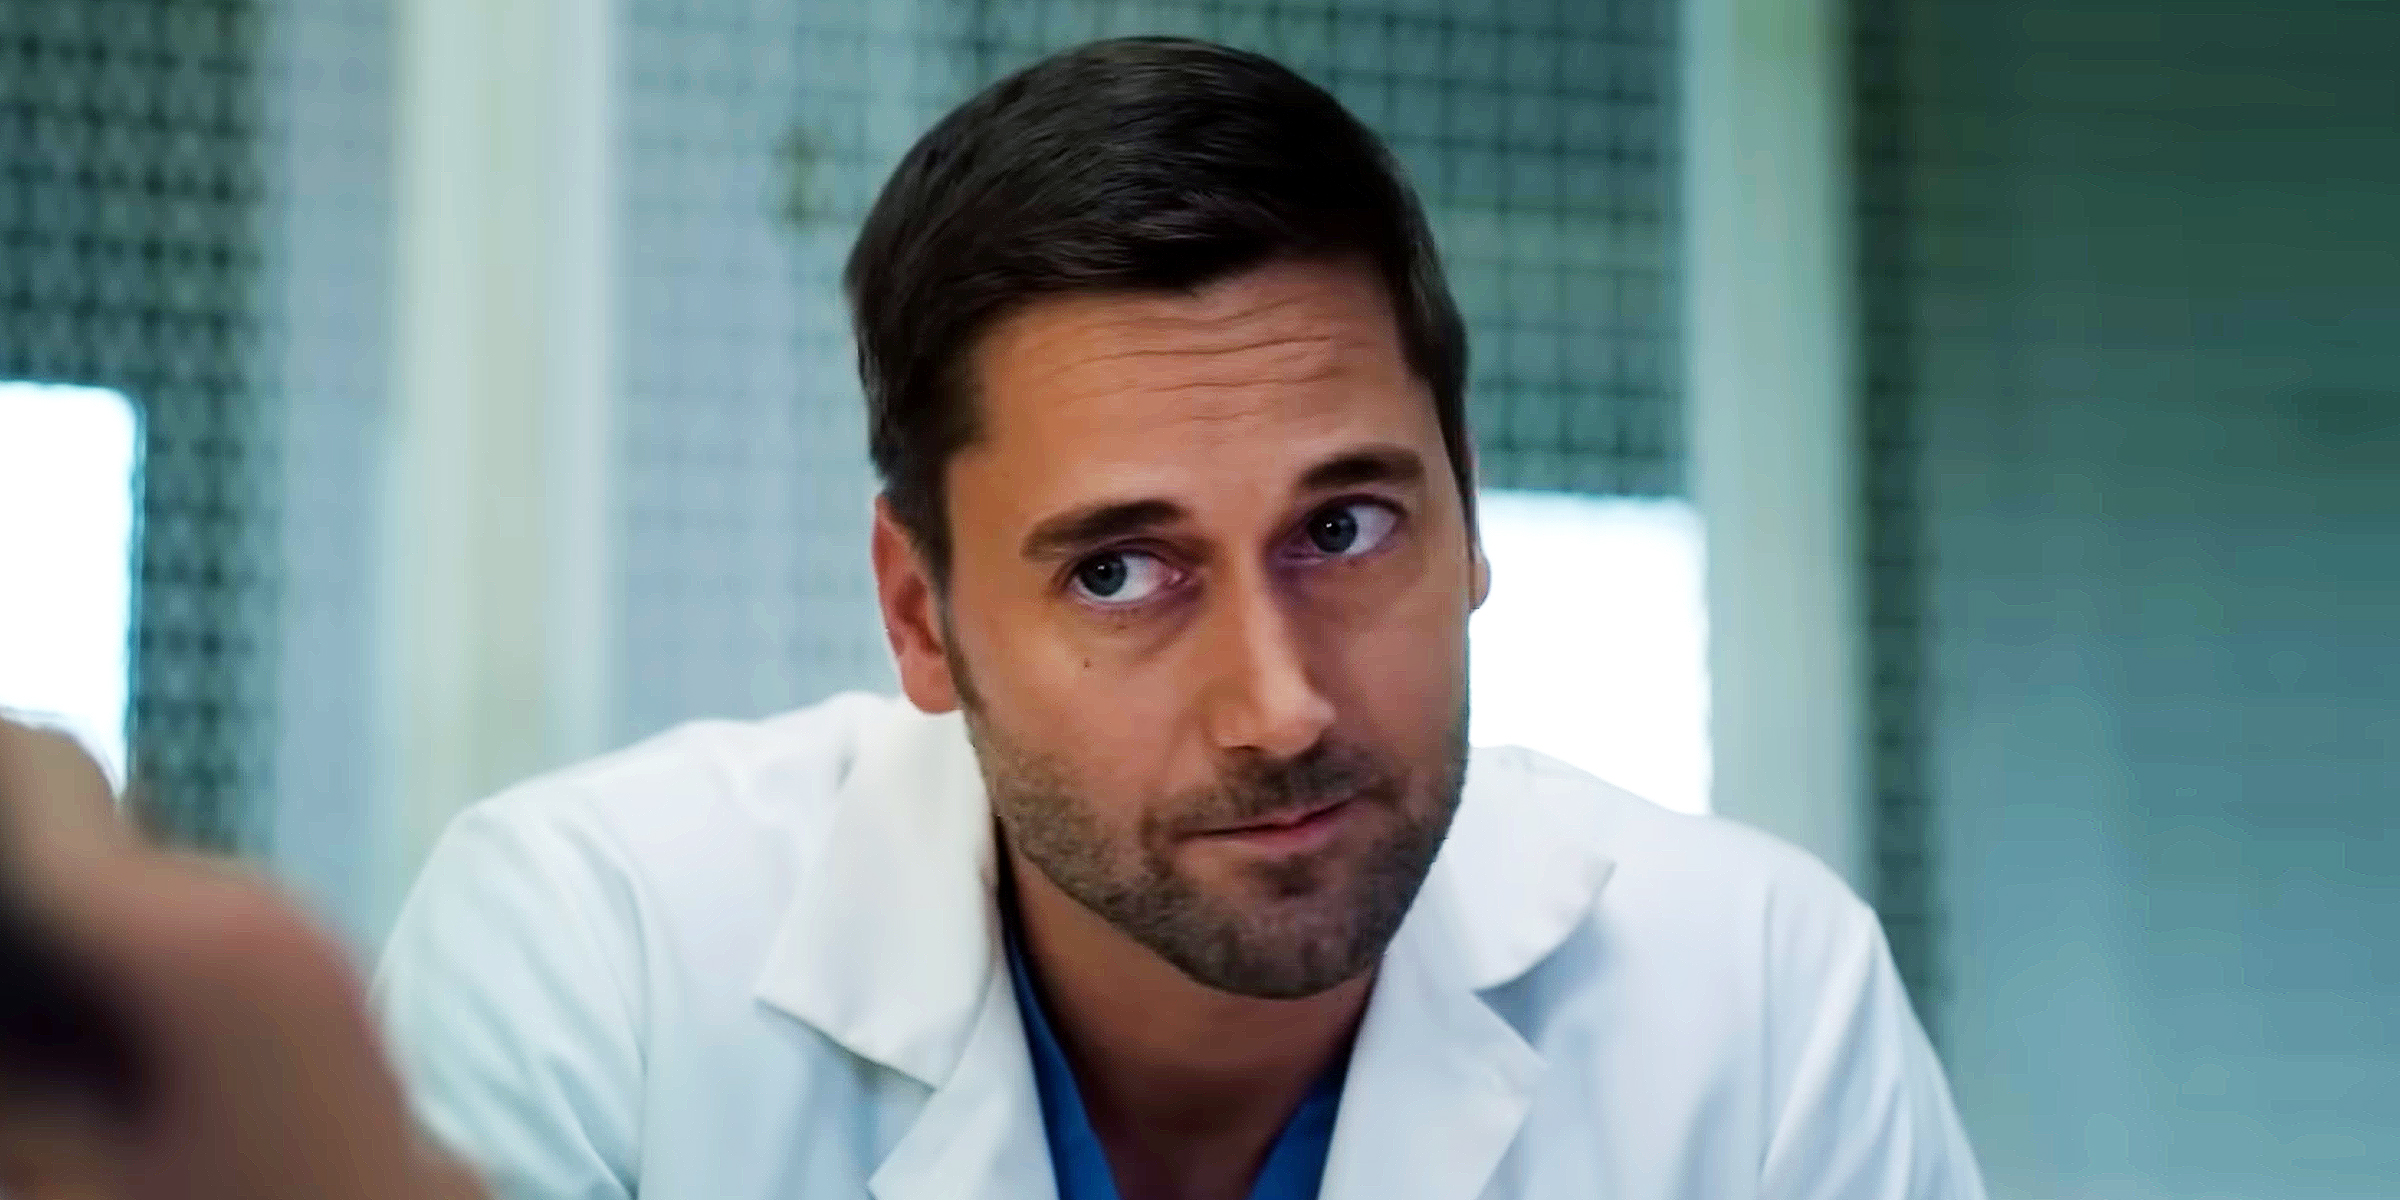 Ryan Eggold as Dr. Max Goodwin in "New Amsterdam" | Source: YouTube/NewAmsterdamOfficial